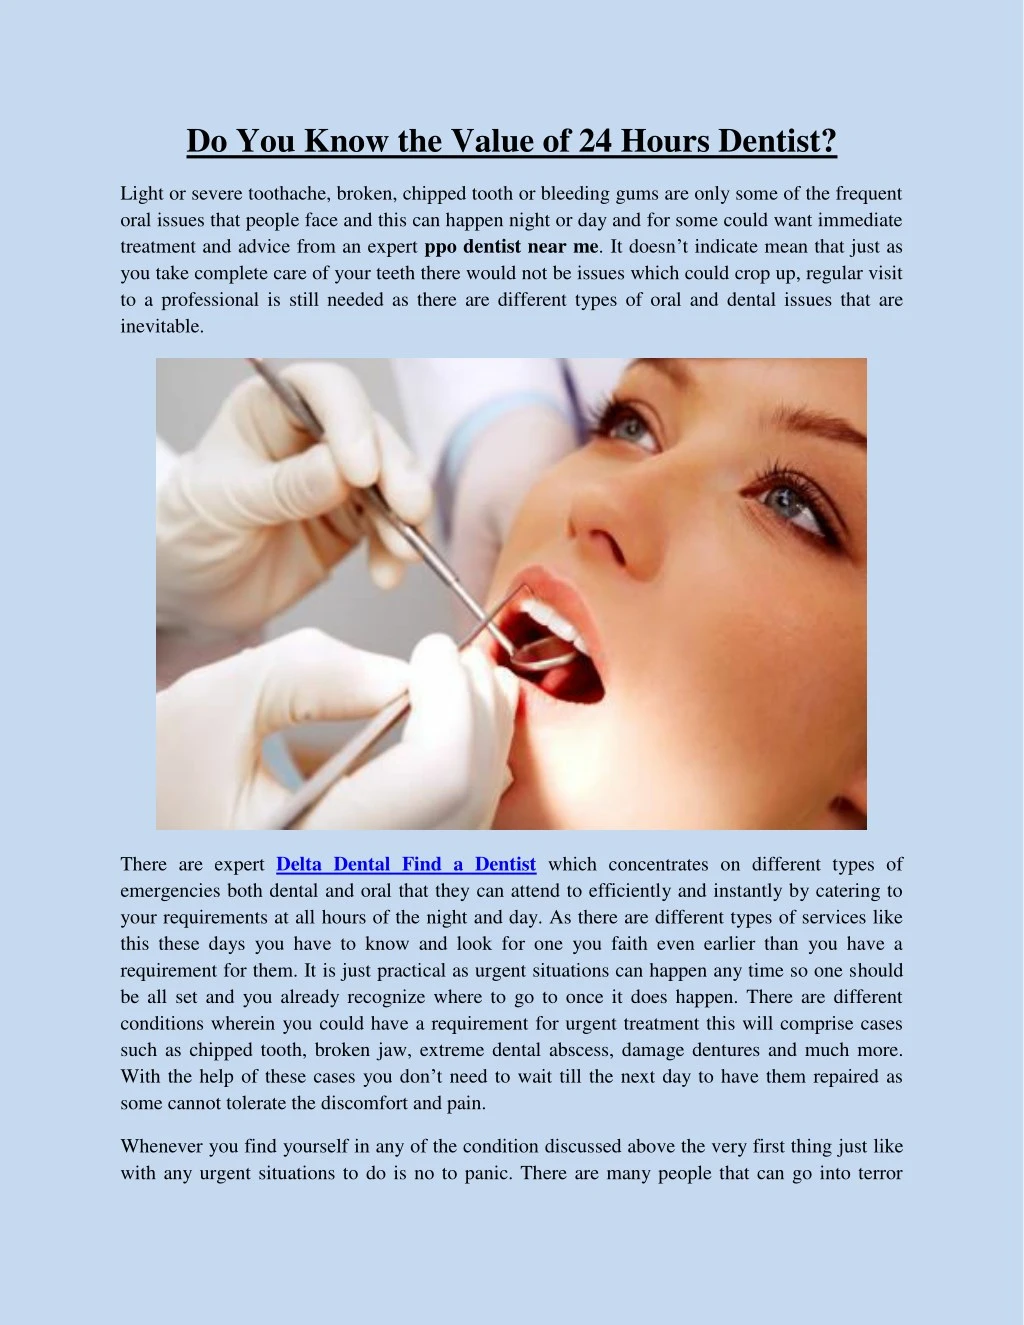 do you know the value of 24 hours dentist